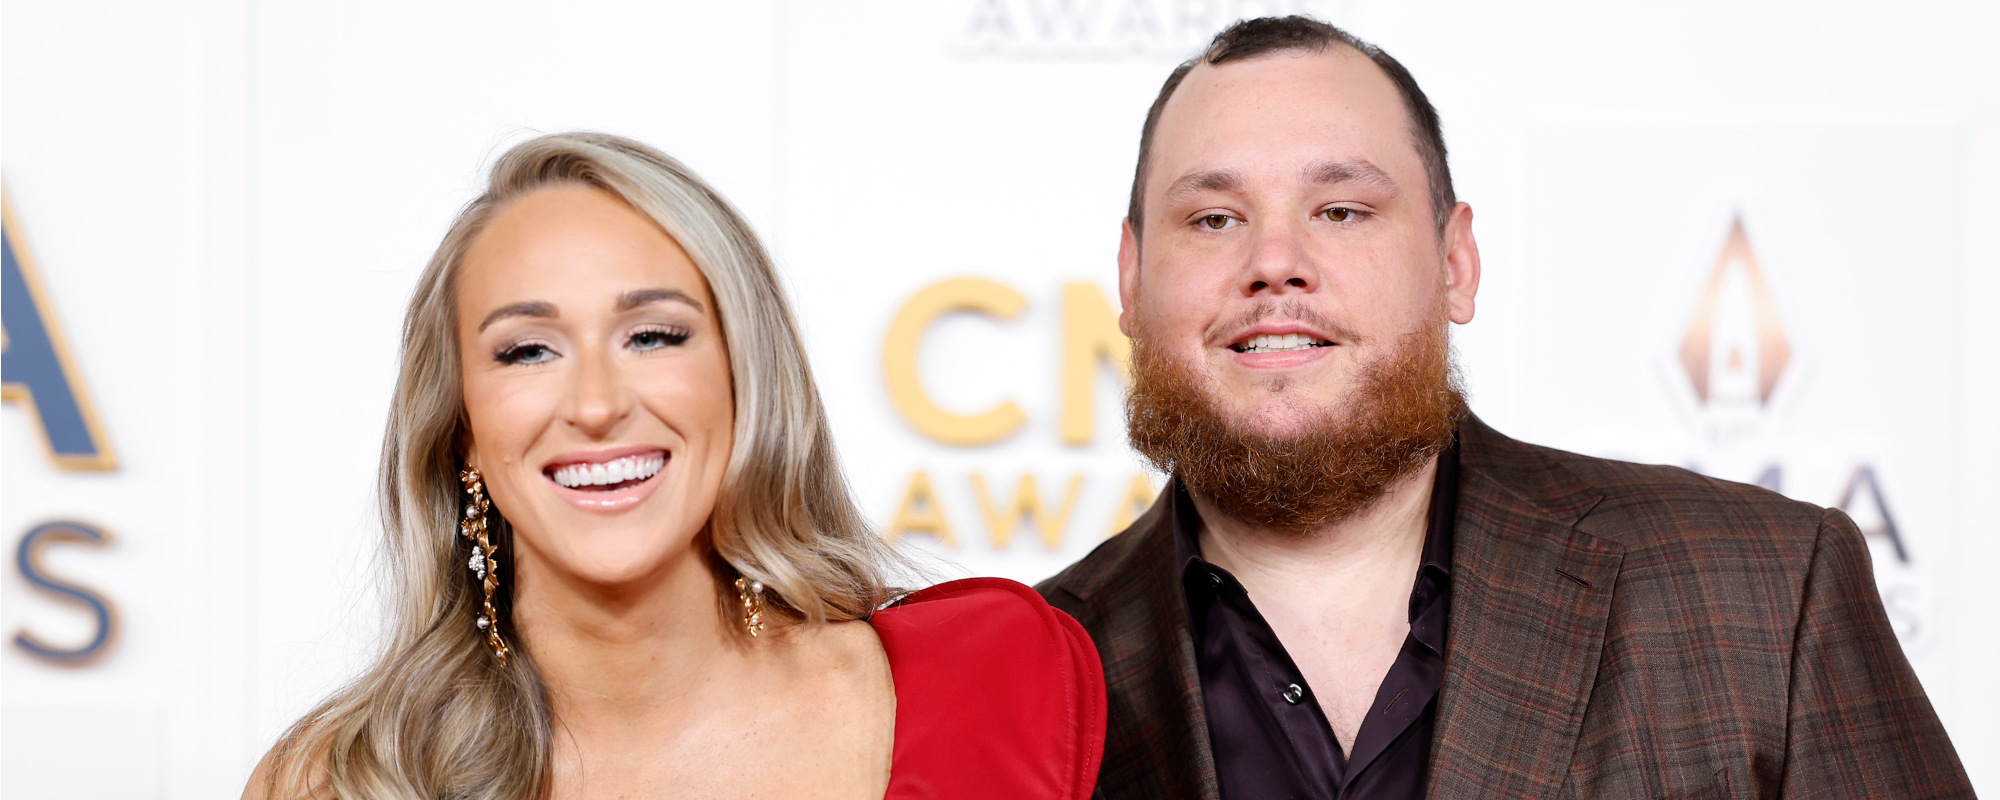 Luke Combs Is Not Putting Up a Christmas Tree This Year: Here’s Why